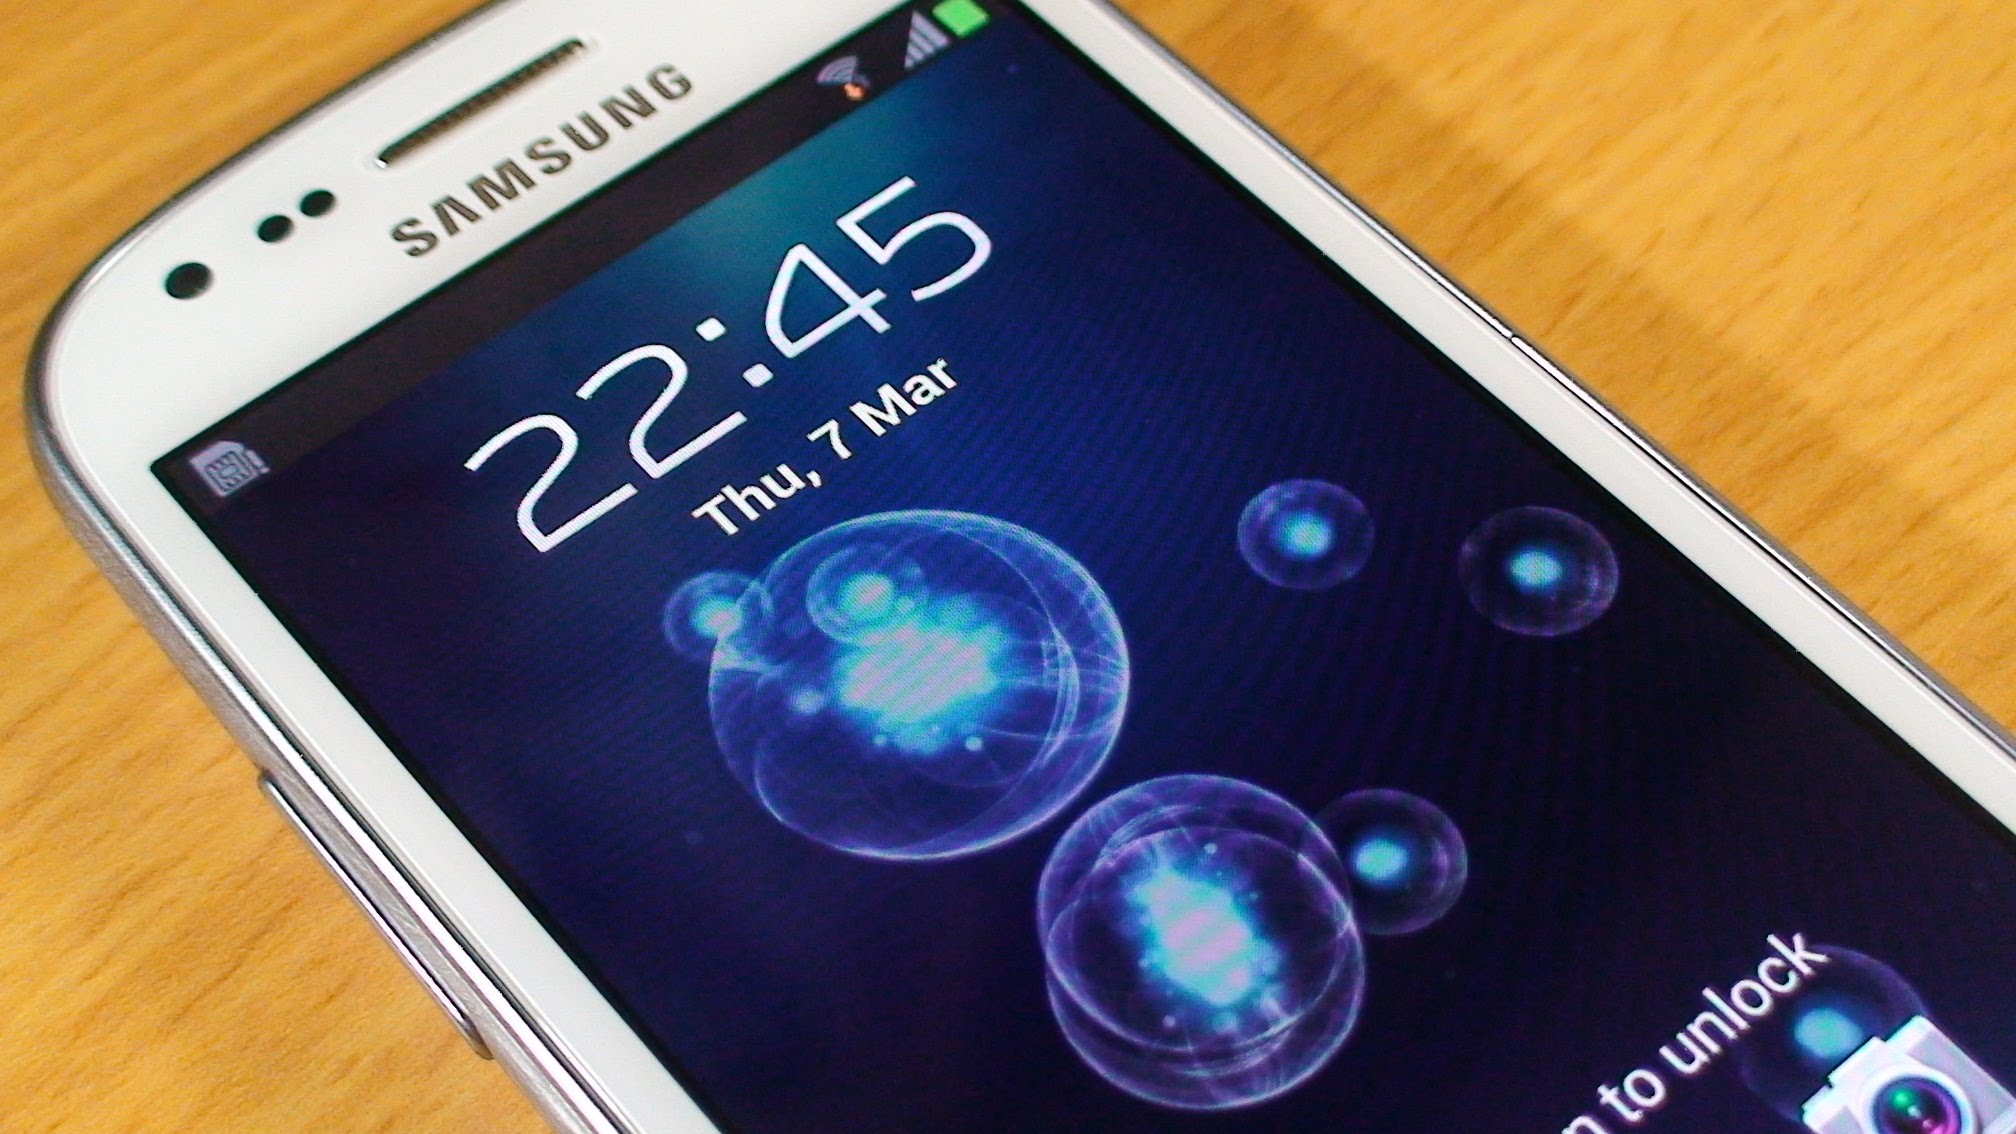 How to set up wallpaper on Samsung Galaxy S3 Mini